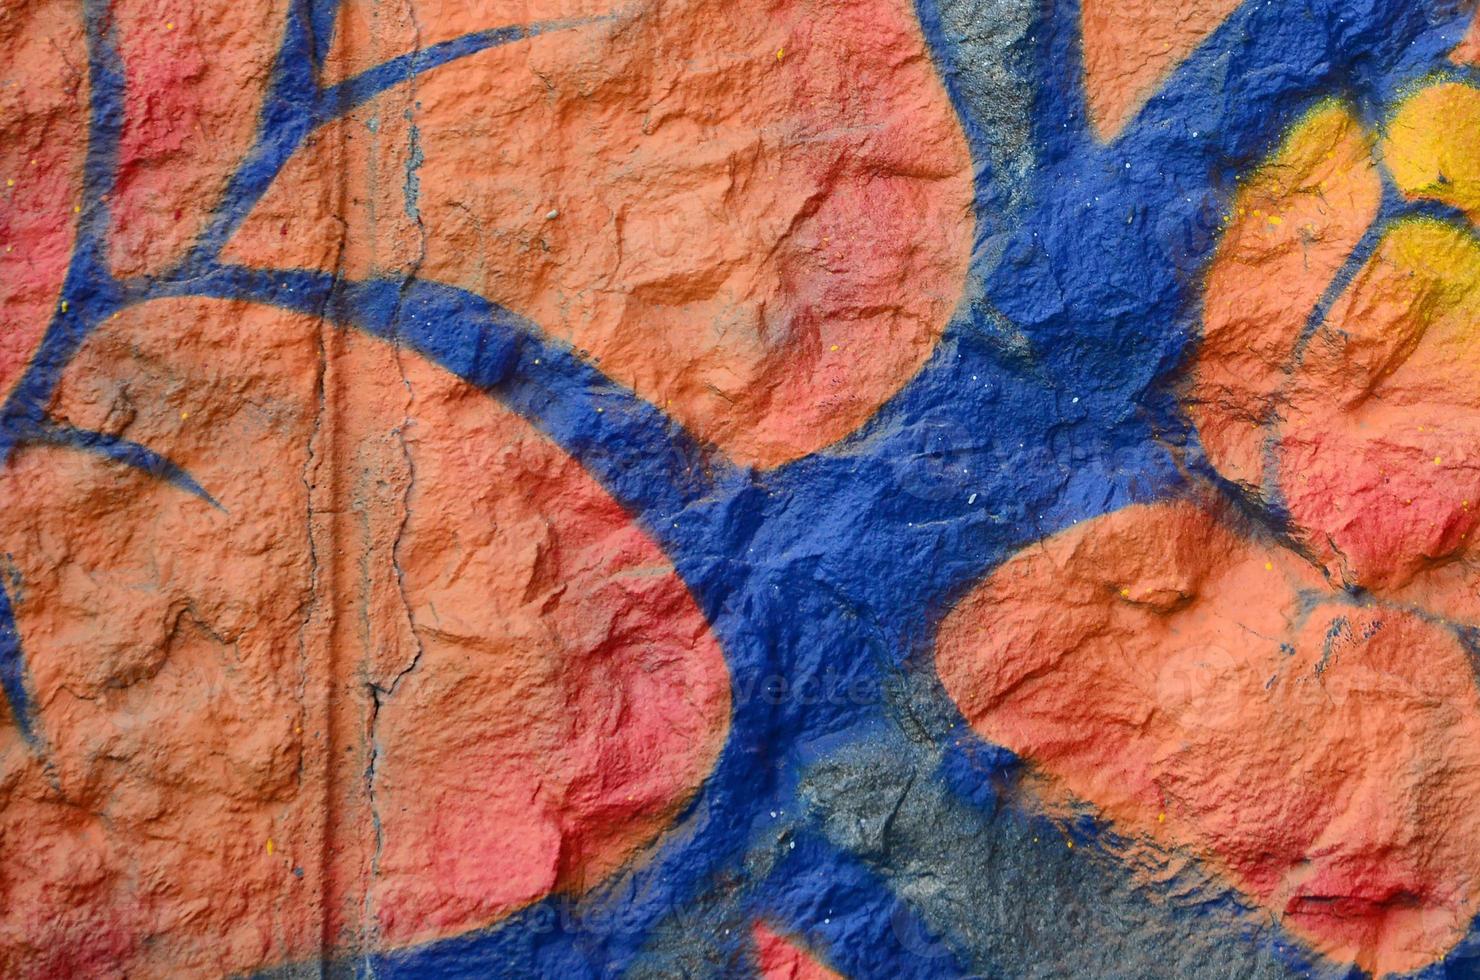 Fragment of graffiti drawings. The old wall decorated with paint stains in the style of street art culture. Orange flower photo